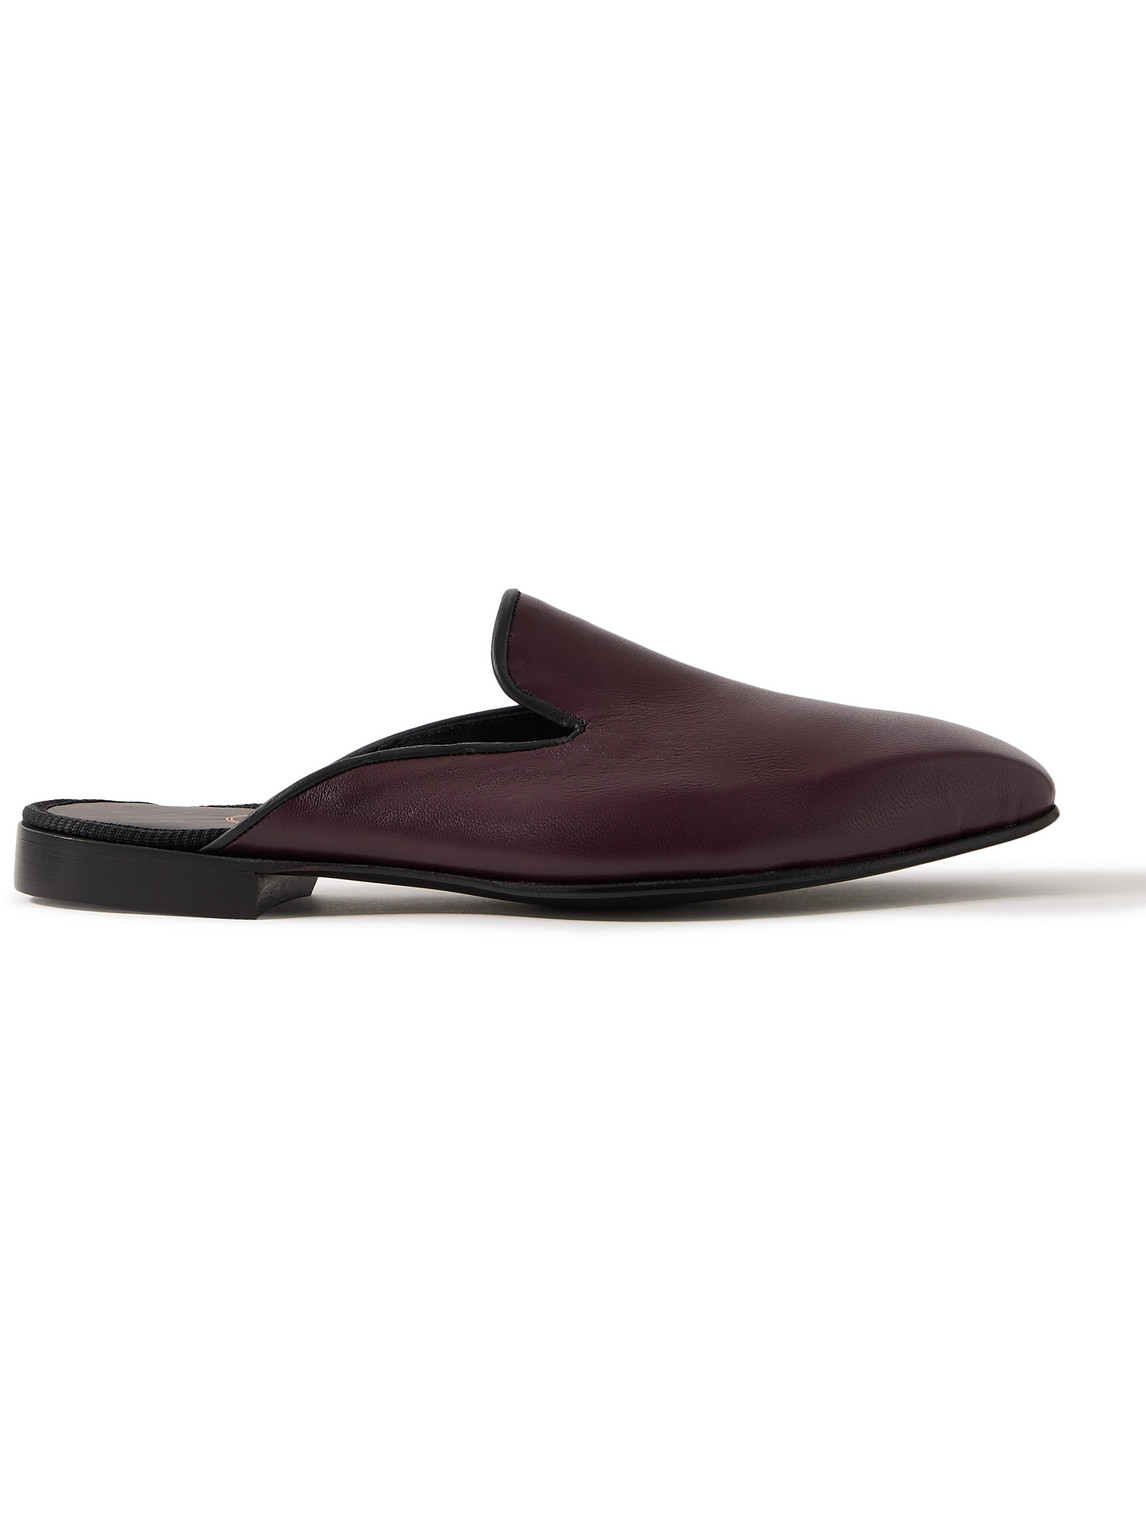 George Cleverley - Leather Backless Loafers - Men - Purple - UK 12 von George Cleverley